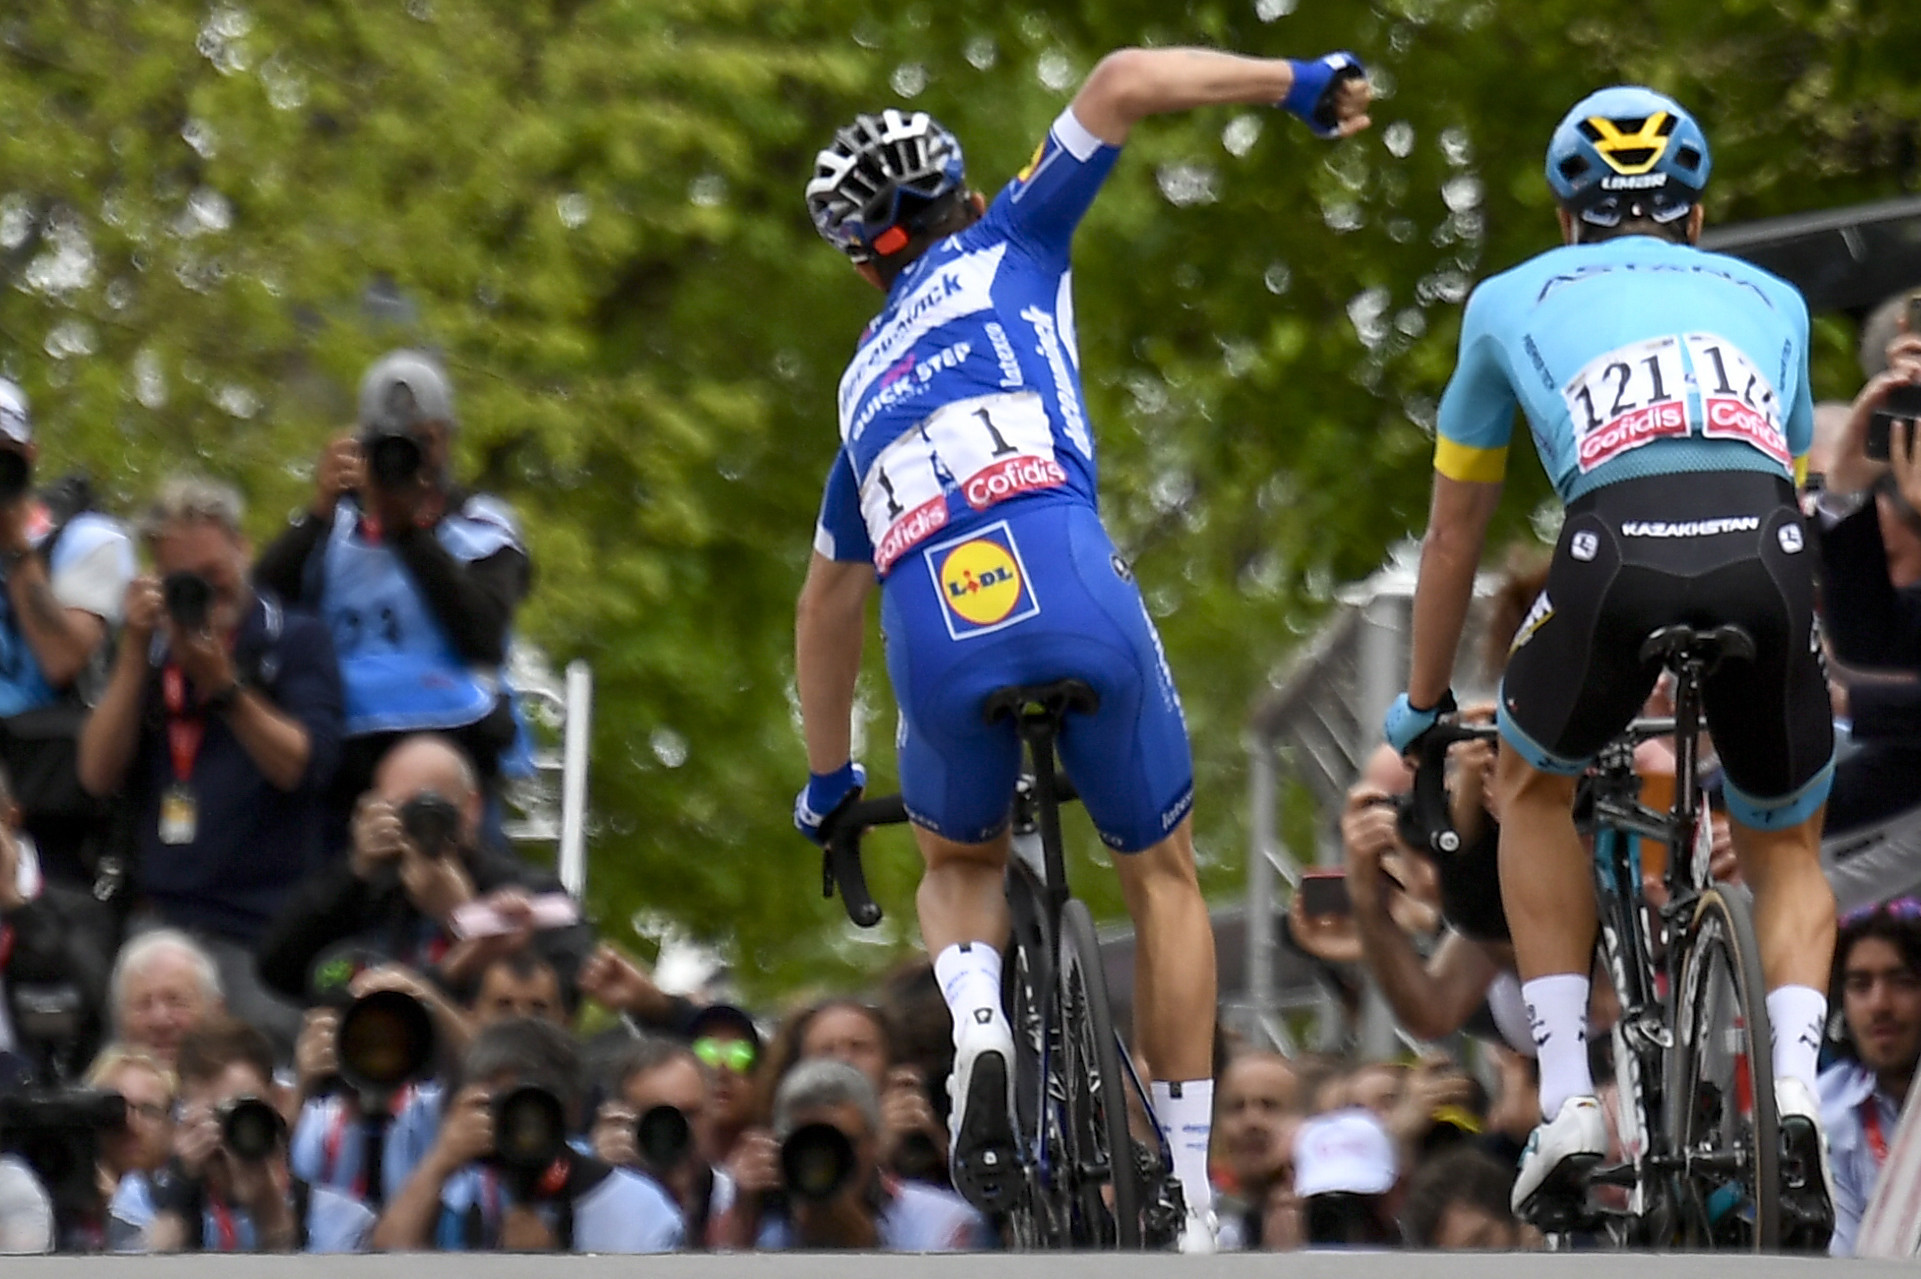 France's Julian Alaphilippe continued his stunning season by defending his title at the race ©Getty Images